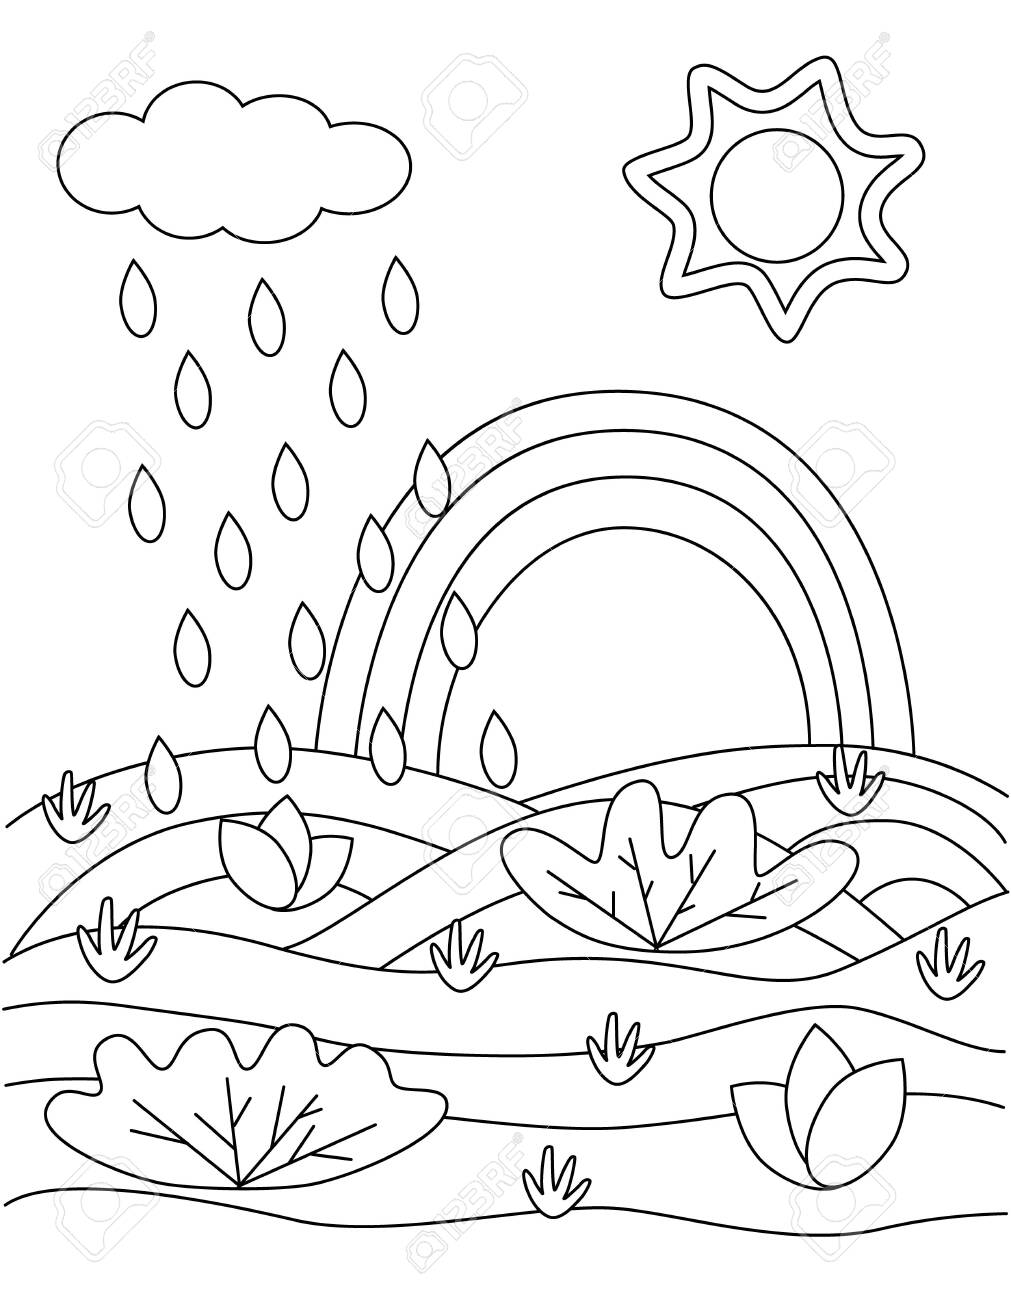 Cute childrens coloring book with cloud rain sun grass for small children the simplest forms basic lines and silhouettes simple vector illustration stock photo picture and royalty free image image